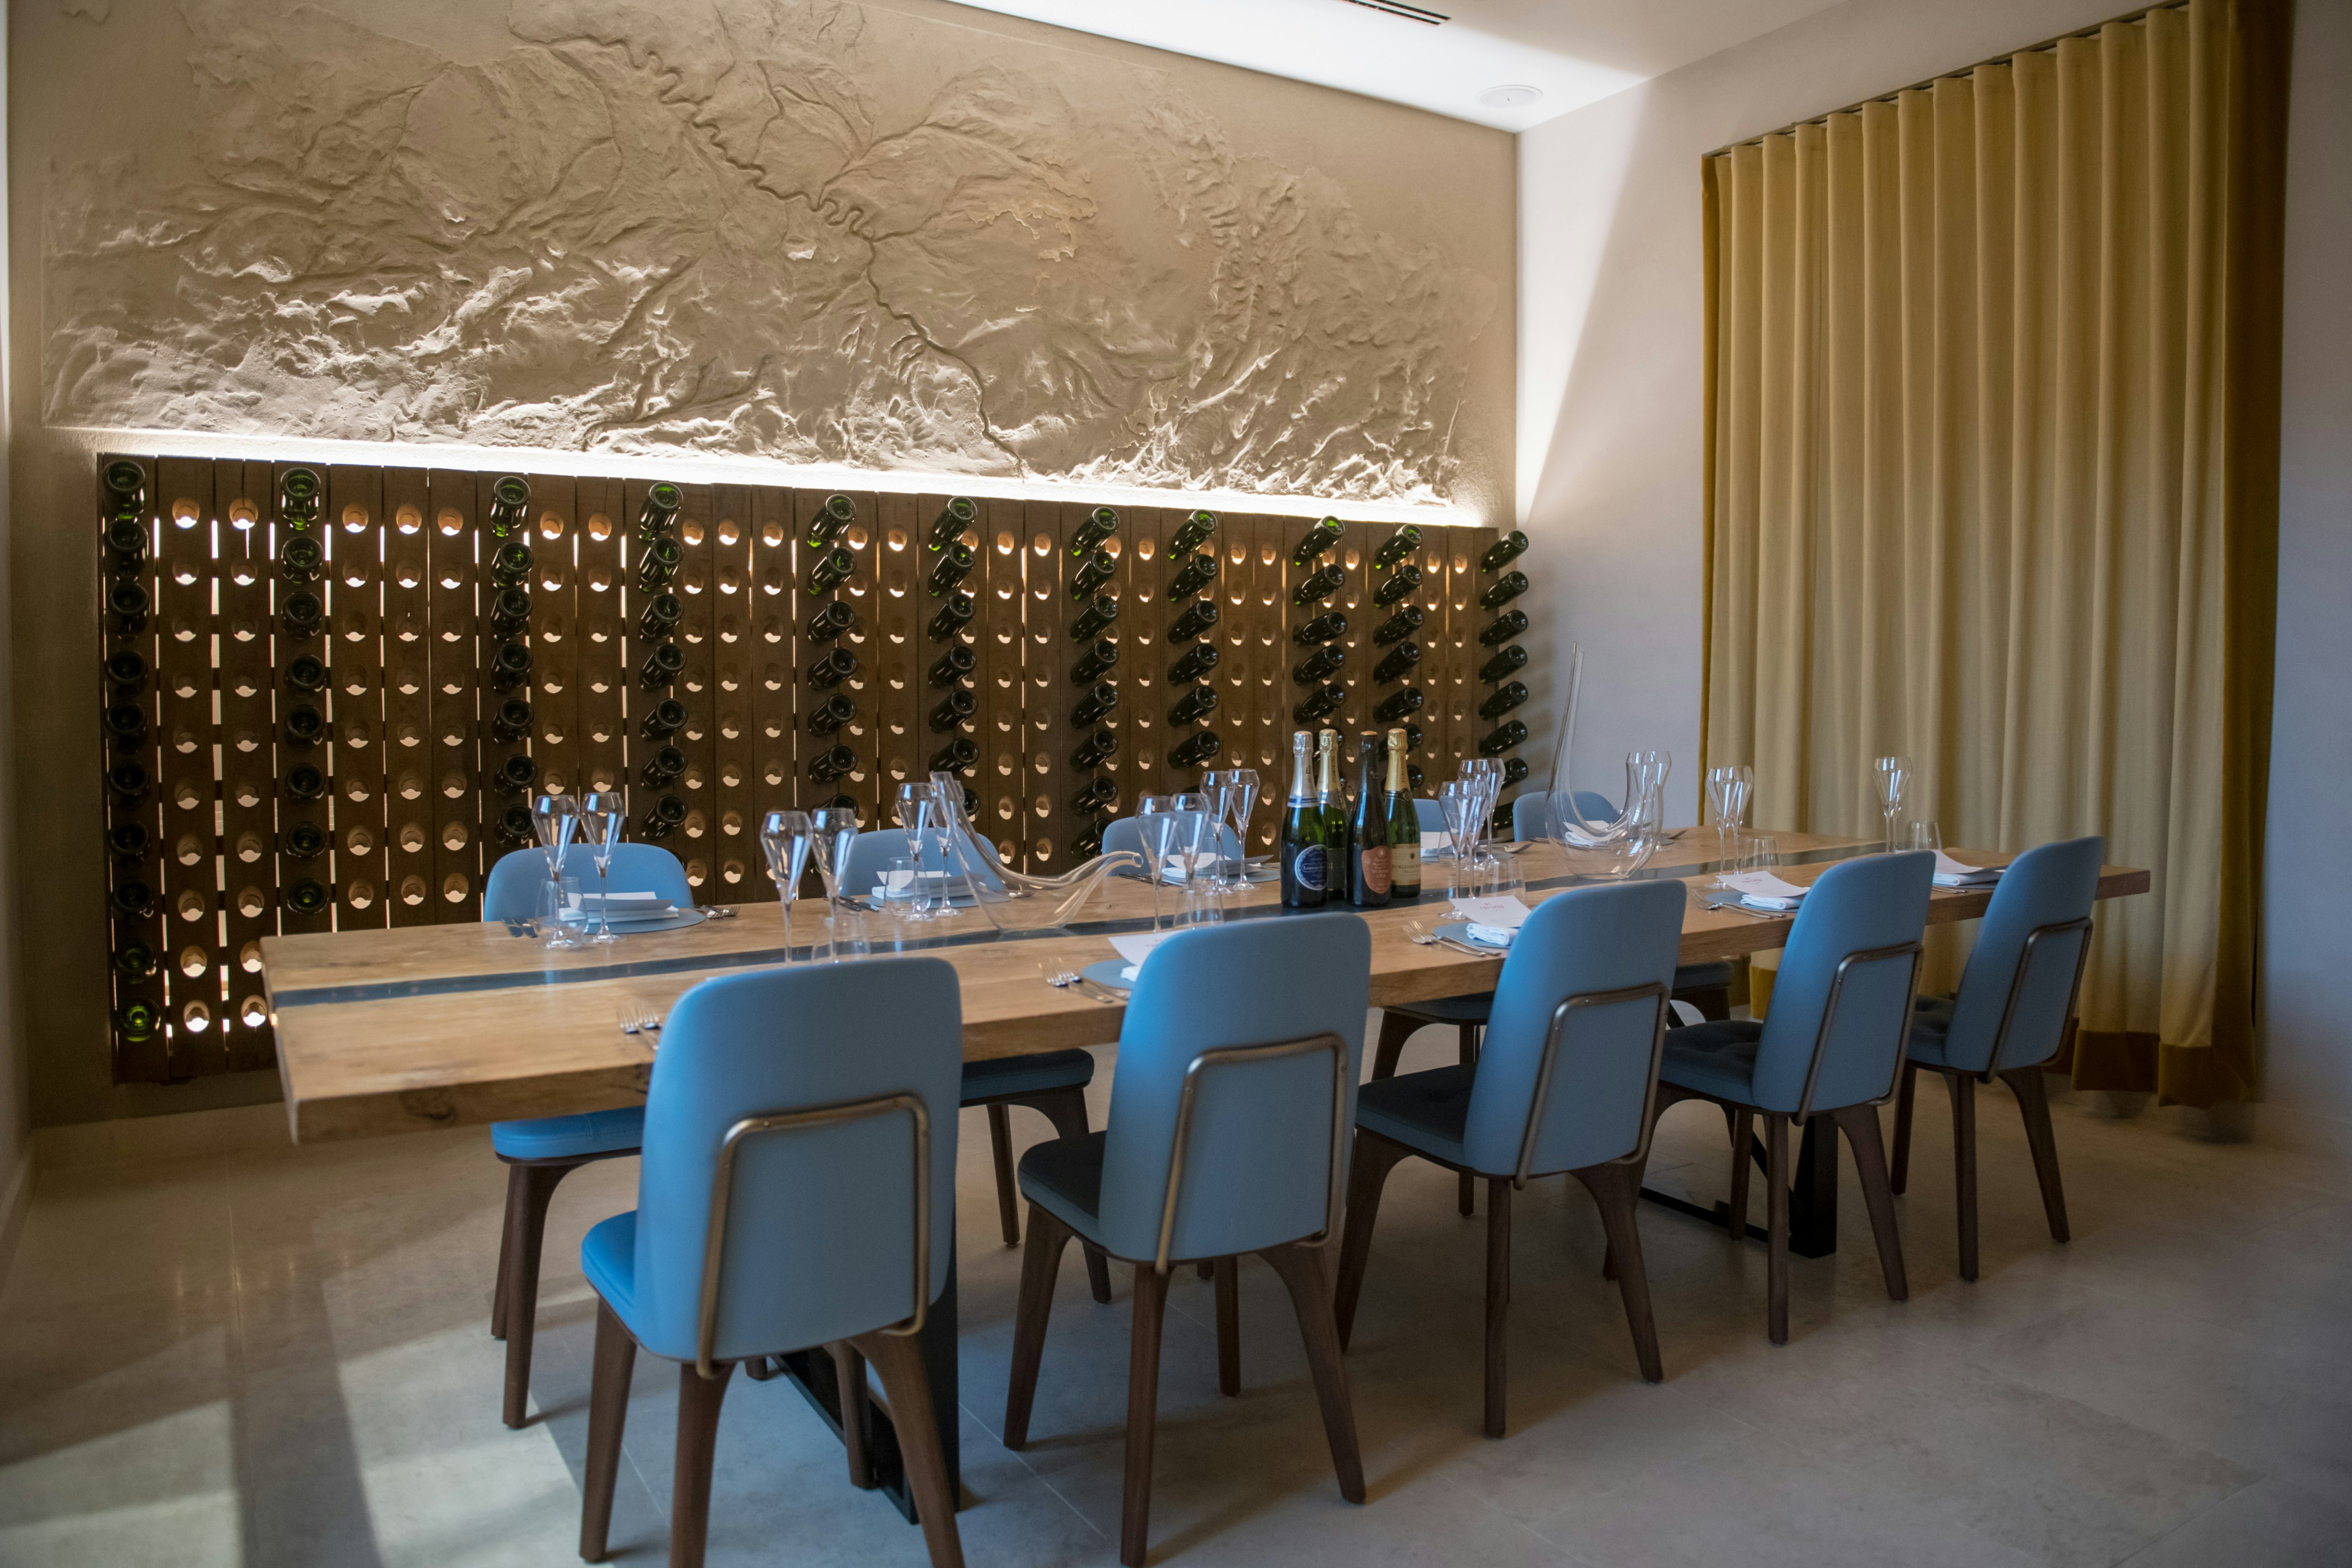 St Pancras Brasserie and Champagne Bar by Searcys  - Tasting Room  image 4